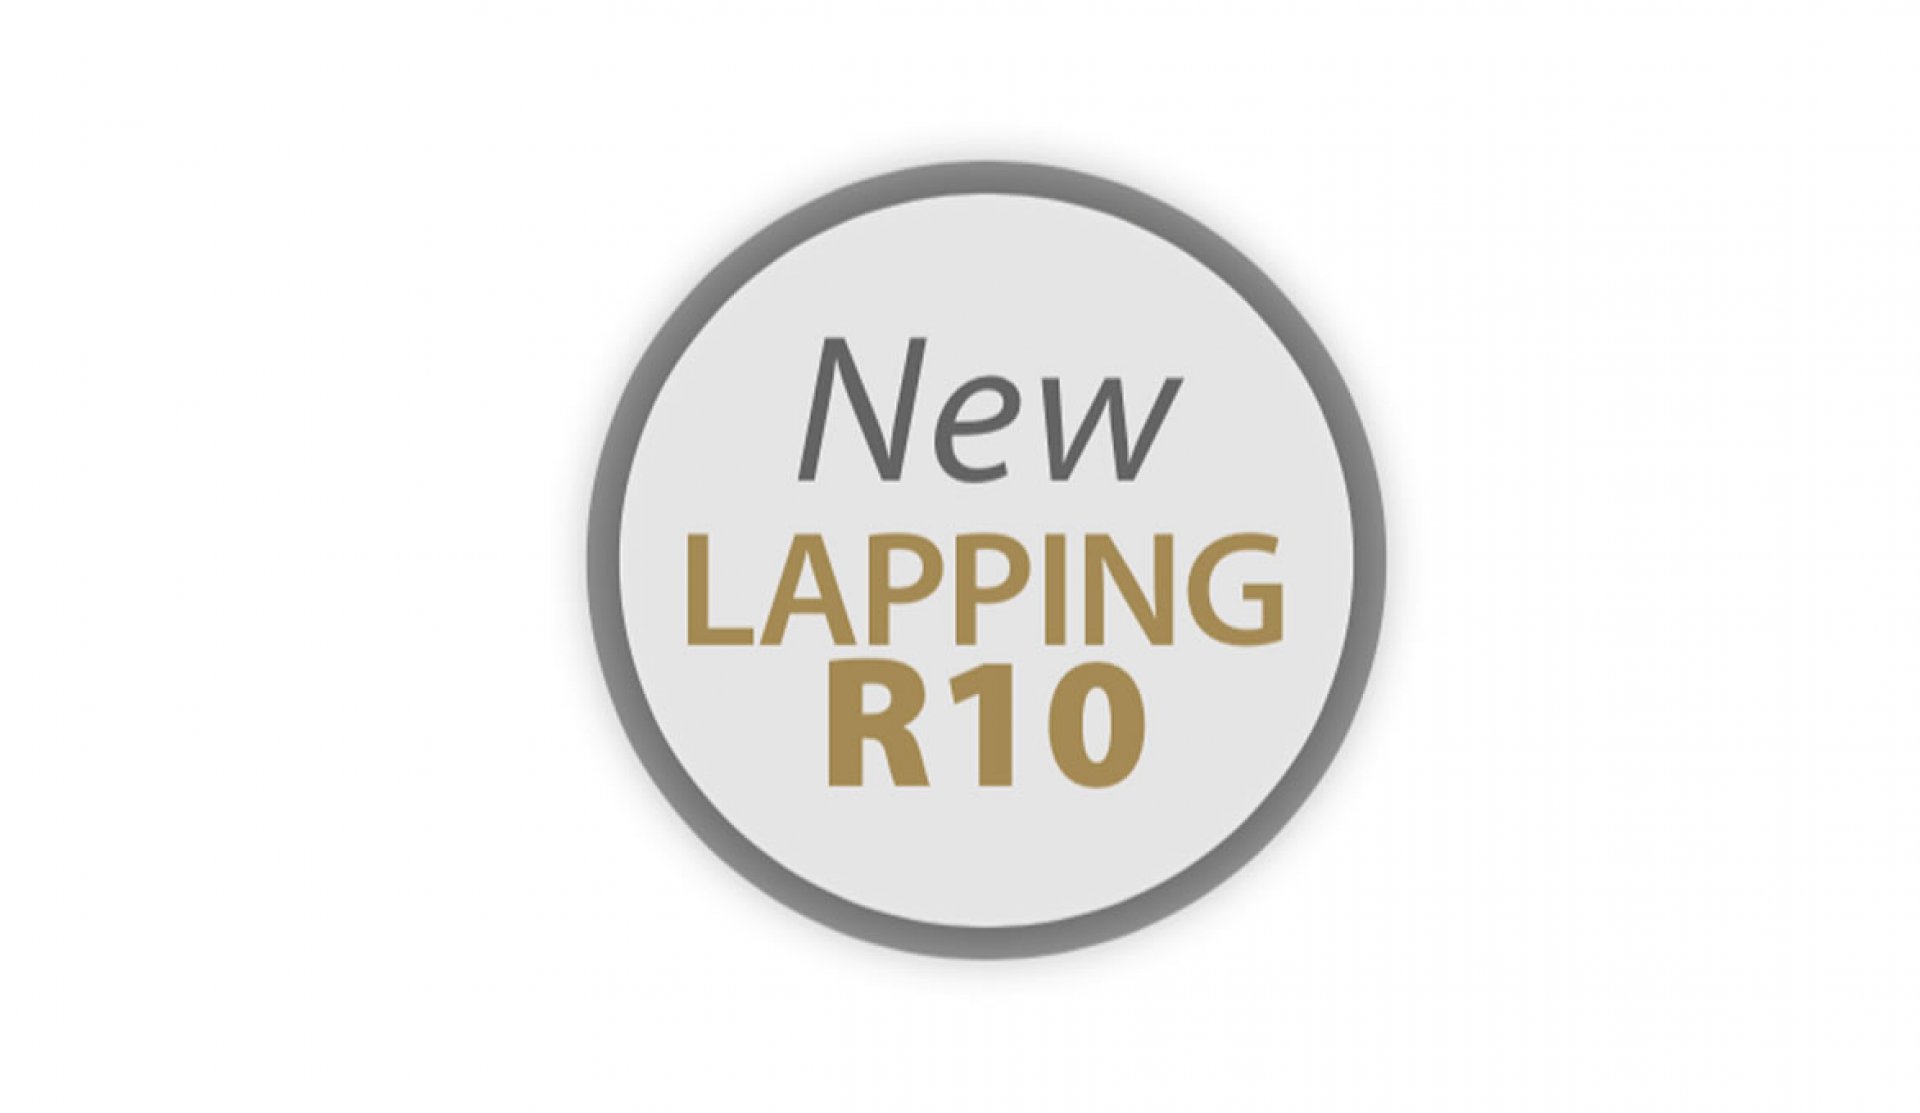 LAPPING R10